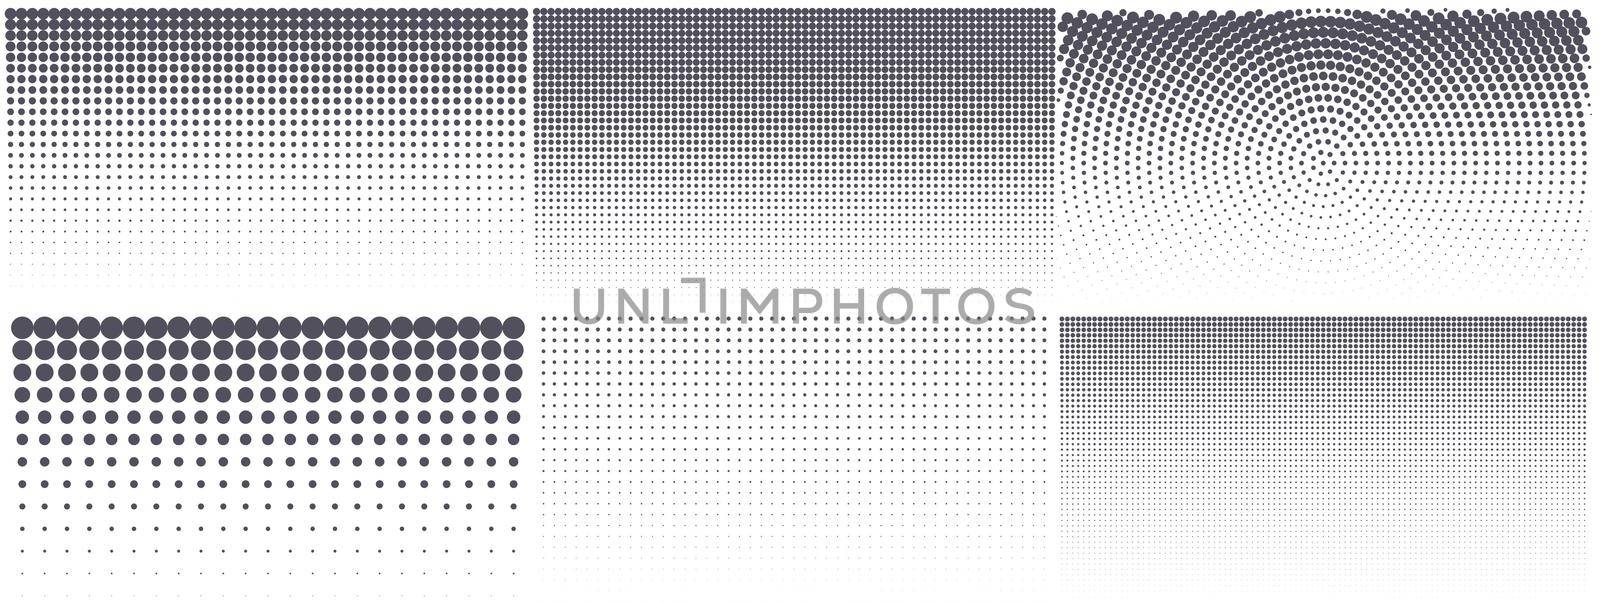 Modern halftone background. Vintage dotted texture for anime or manga design. Abstract comic popart grunge background. Vector illustration